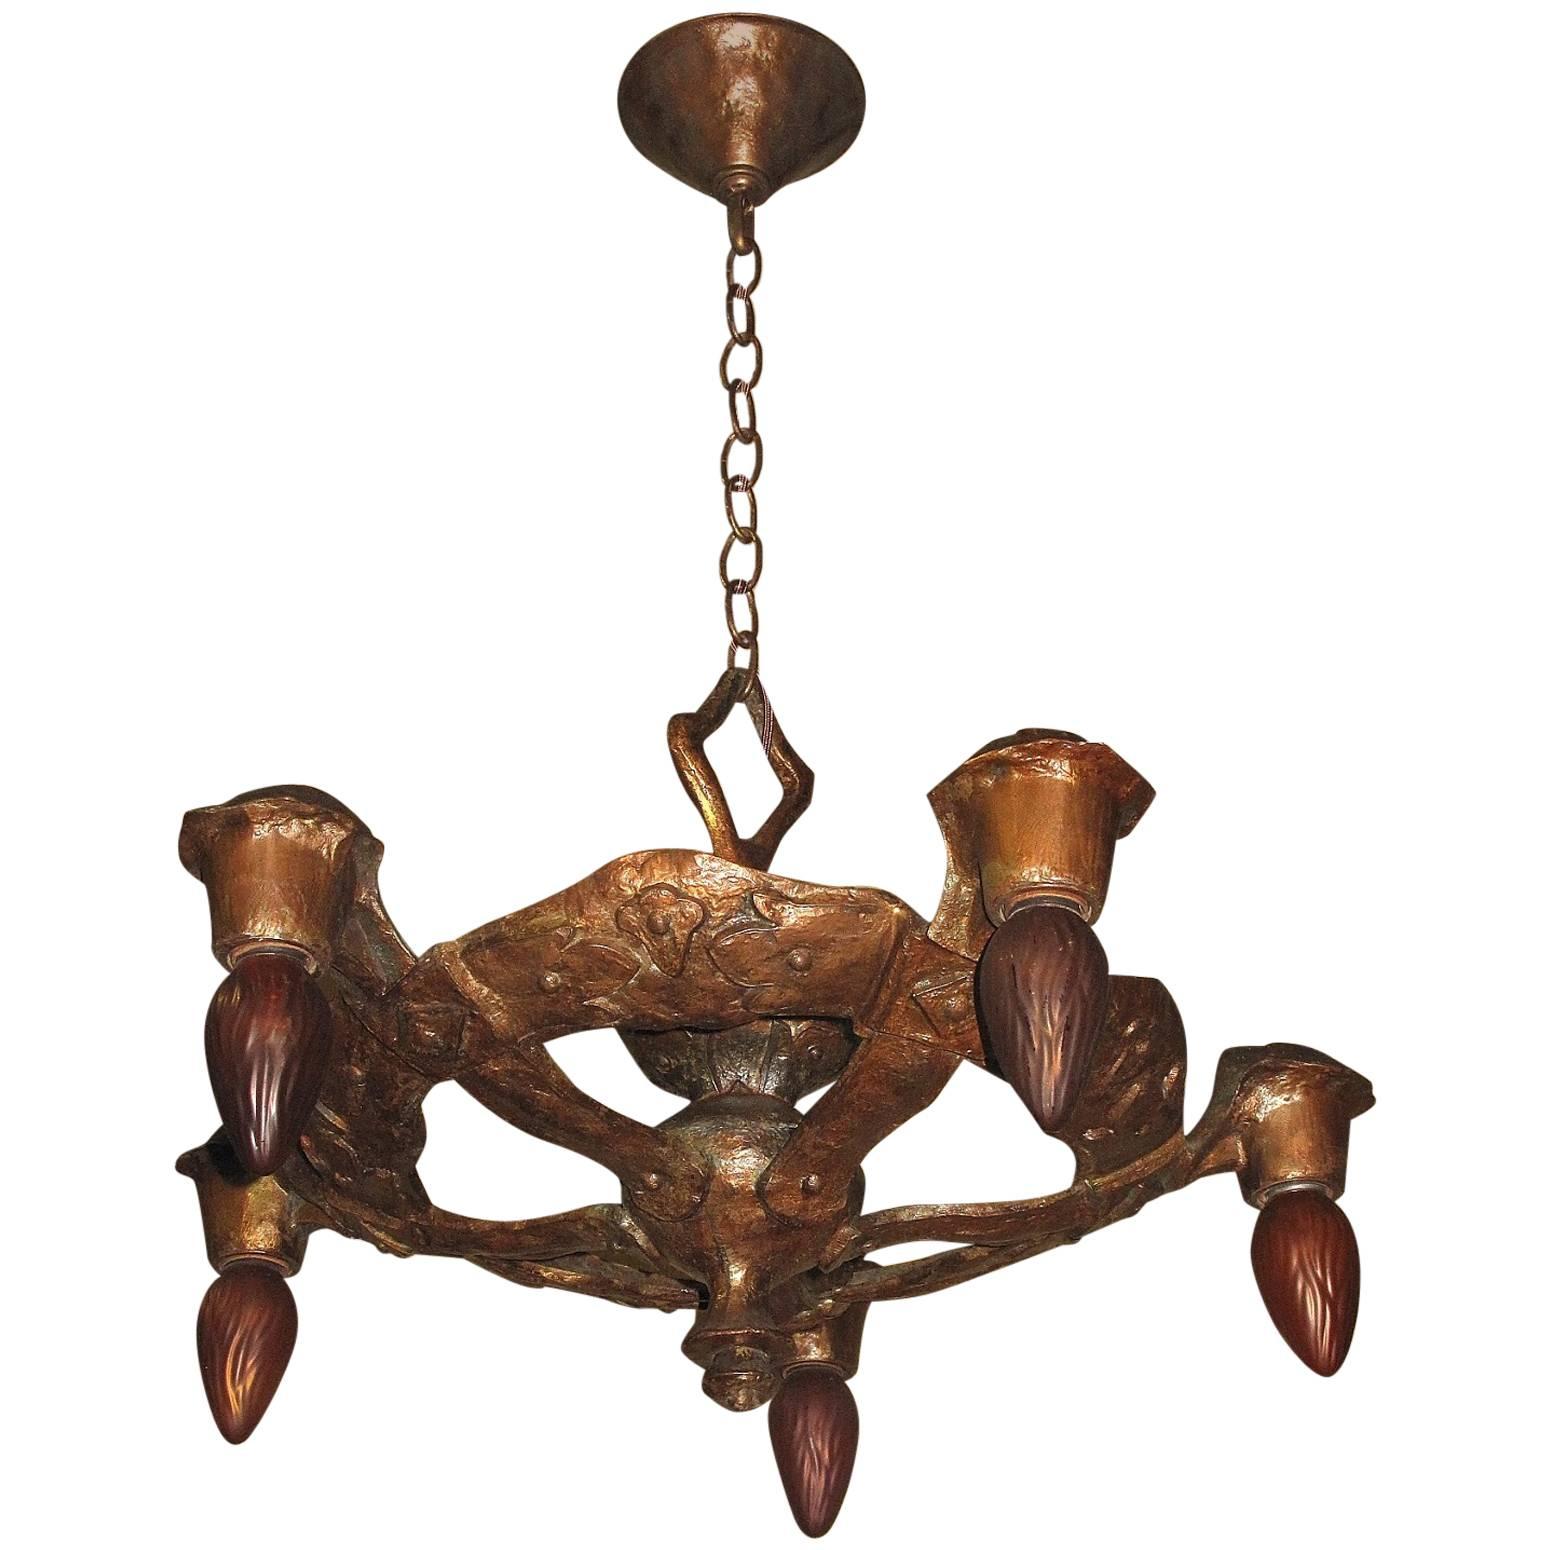 1920s CB Rogers Five-Light Fixture in Original Colors and Patina For Sale